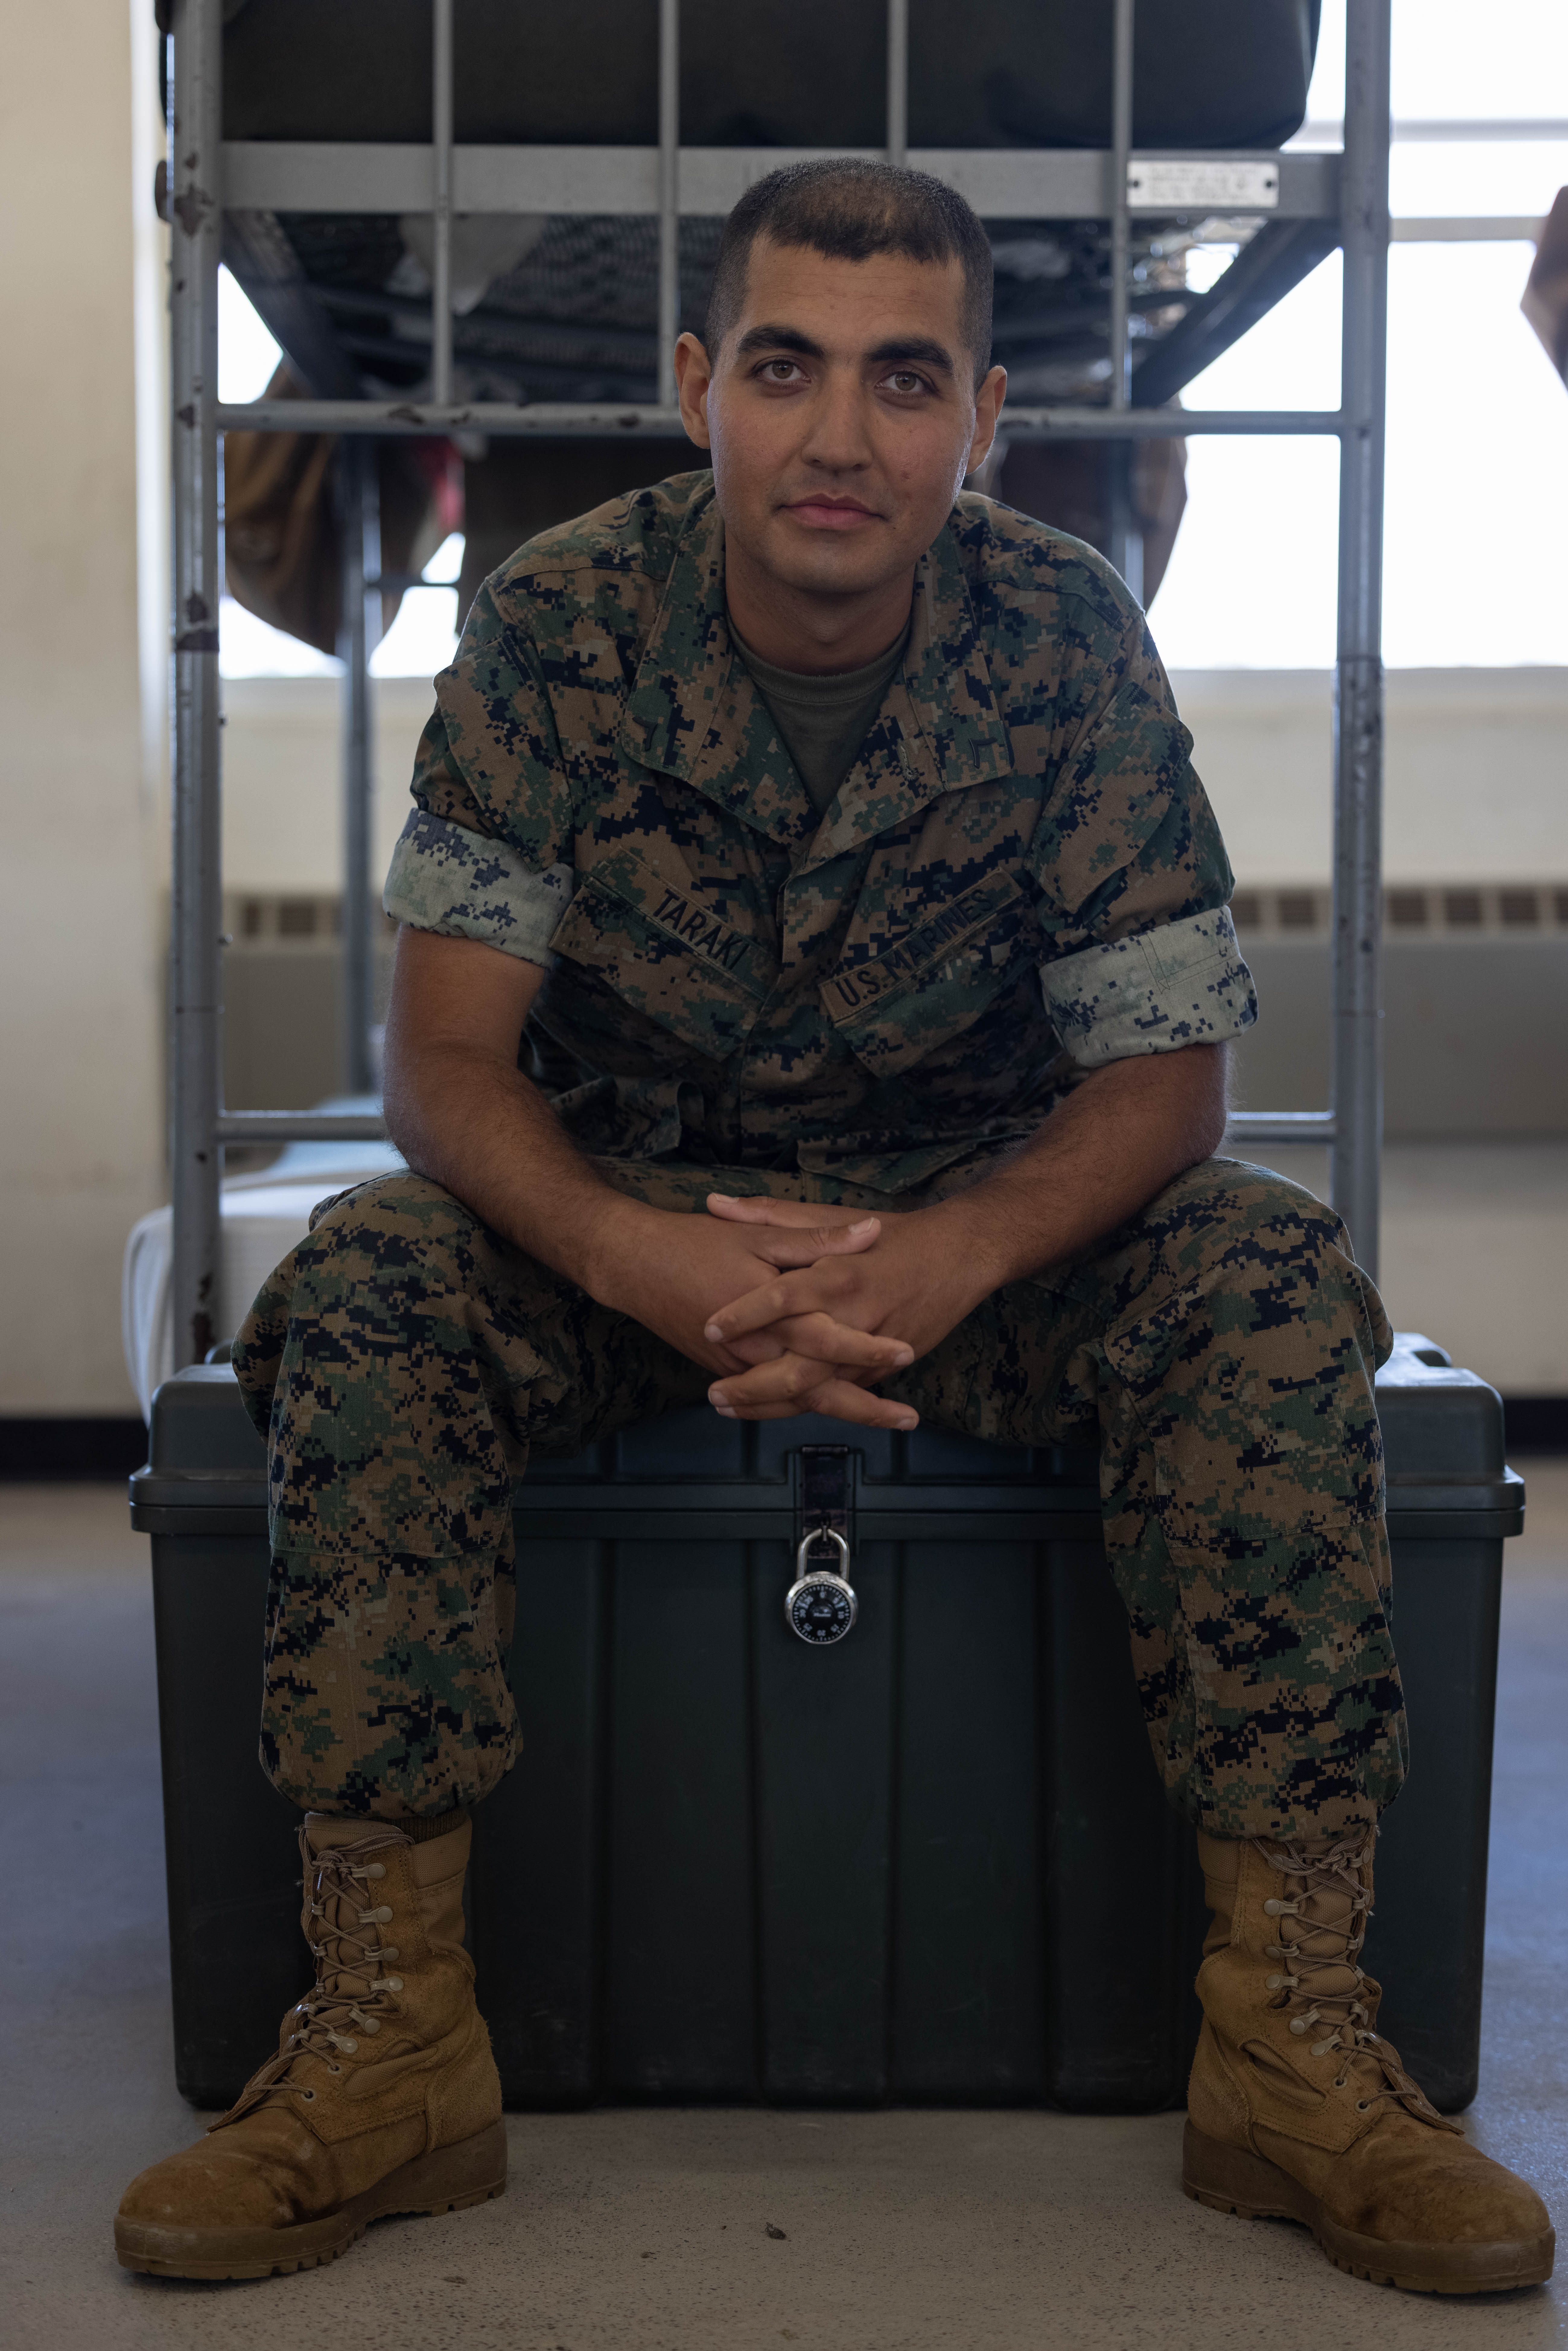 U.S. Marine Corps PFC Aimal Taraki poses for a photo at Marine Corps Recruit Depot San Diego, April 3, 2023. Taraki is a former translator who used to coordinate between U.S. and Afghan forces during the war in Afghanistan. Taraki emigrated to the U.S. in 2018 with the hopes of joining the Marine Corps.